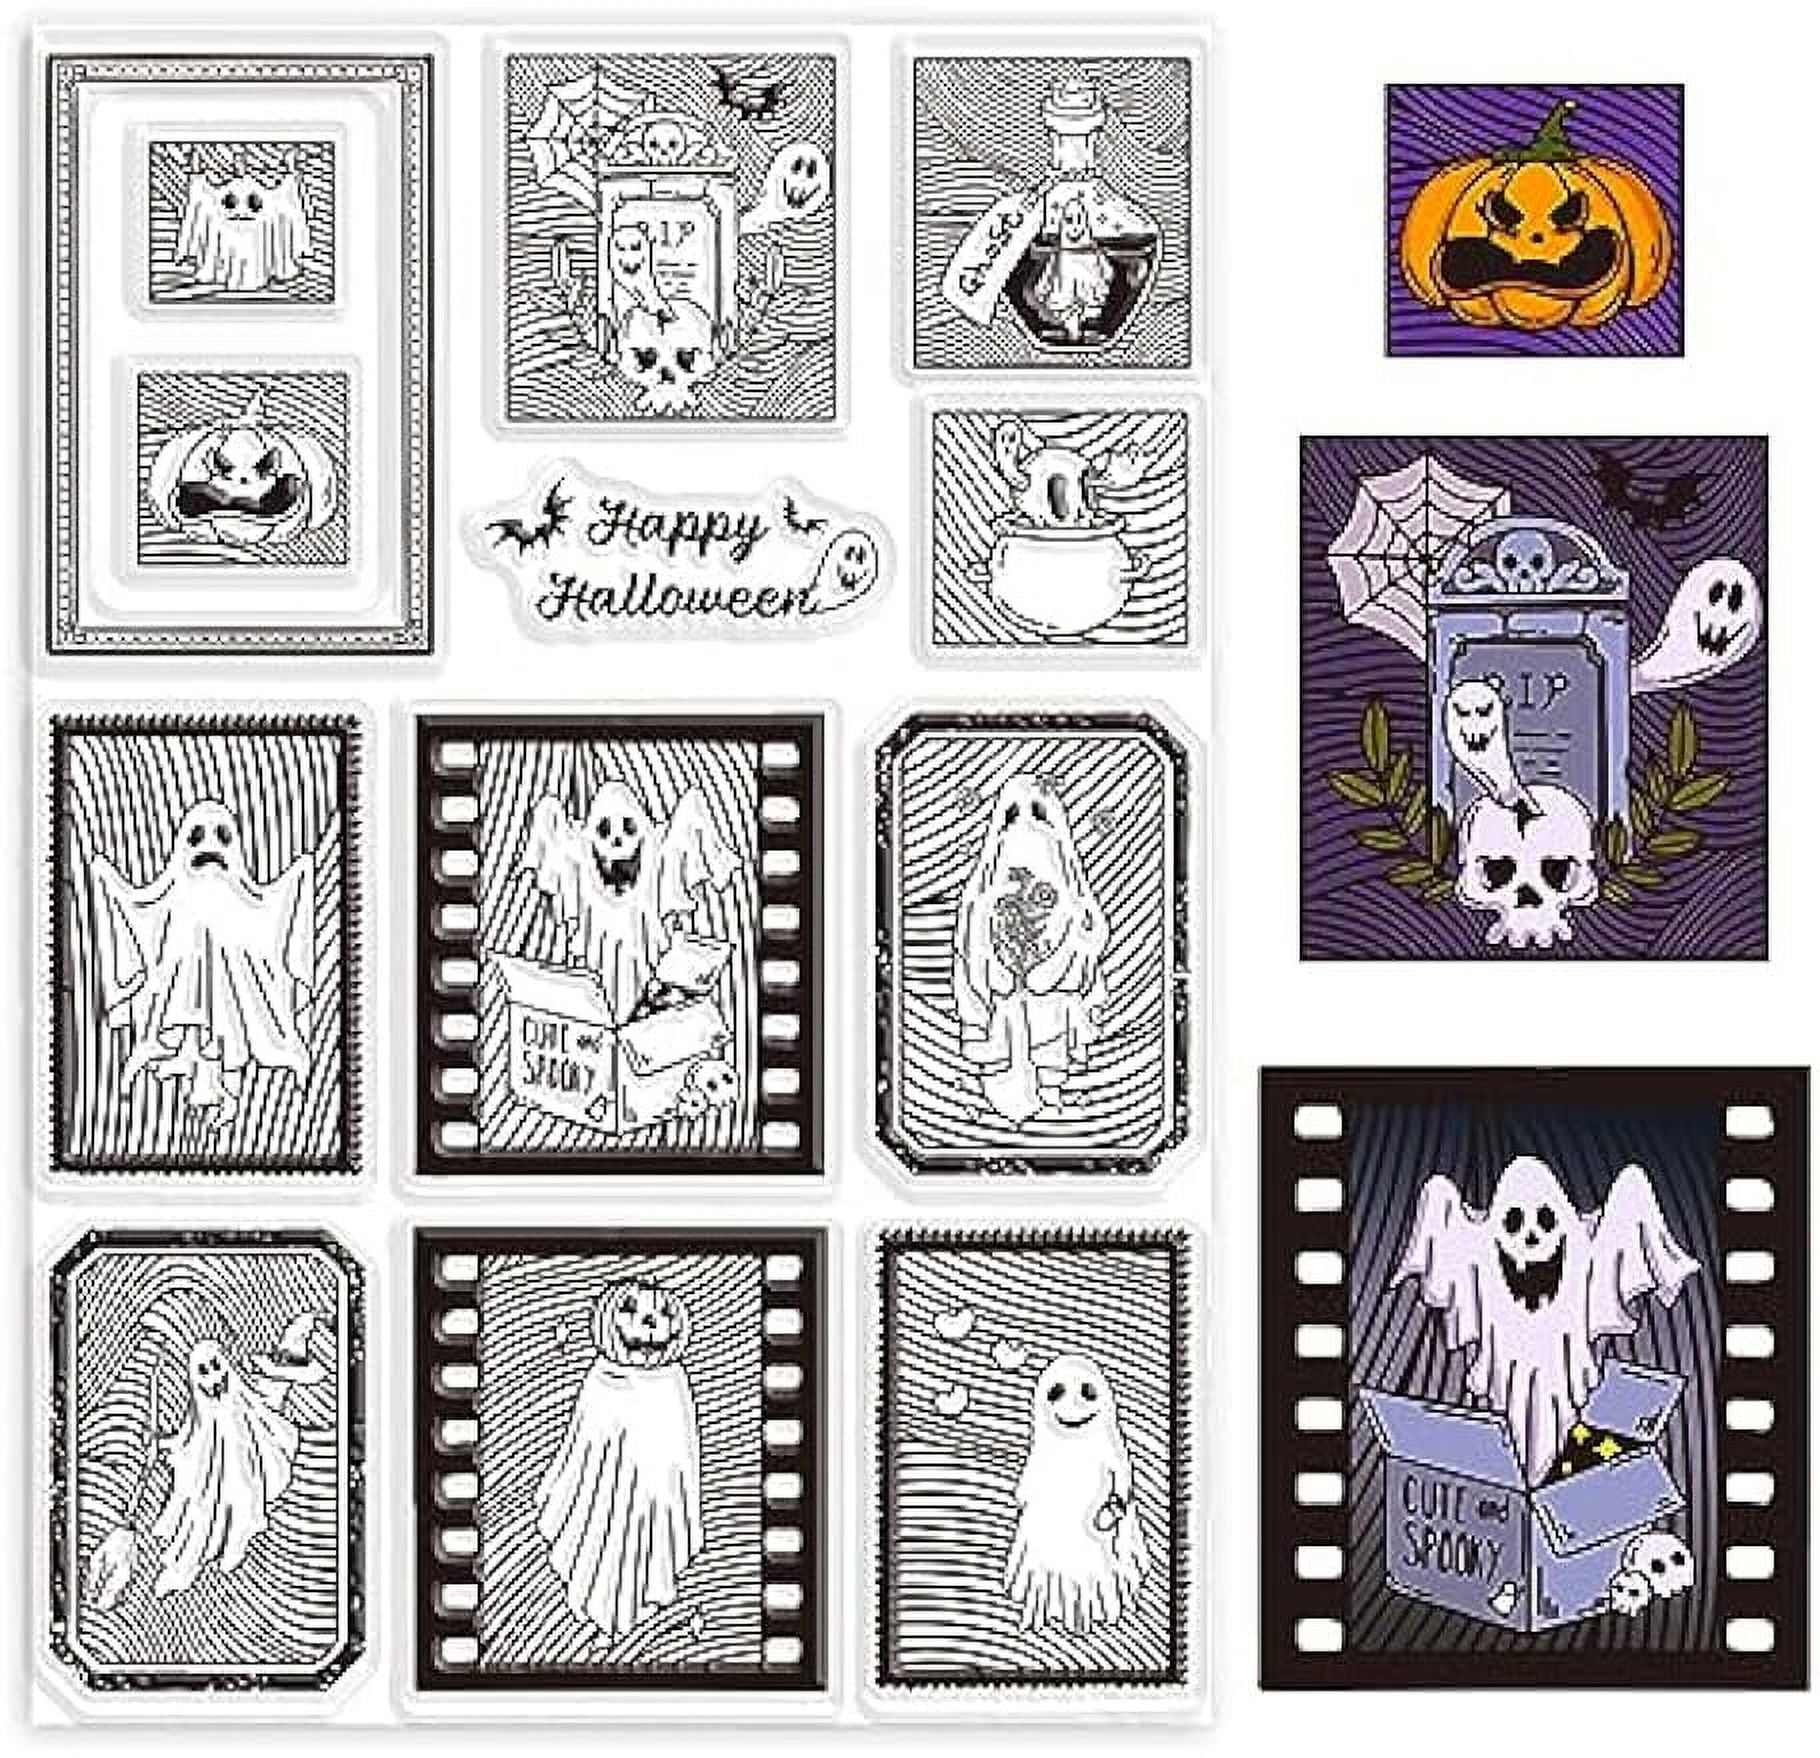  Lapoo Stamps and Dies for Card Making, Santa Claus DIY  Scrapbooking Arts Crafts, Metal Cutting Dies Clear Stamps Sets Arts  Supplies Silicone Gifts for Christmas, Thanksgiving, Halloween (SC040) :  Arts